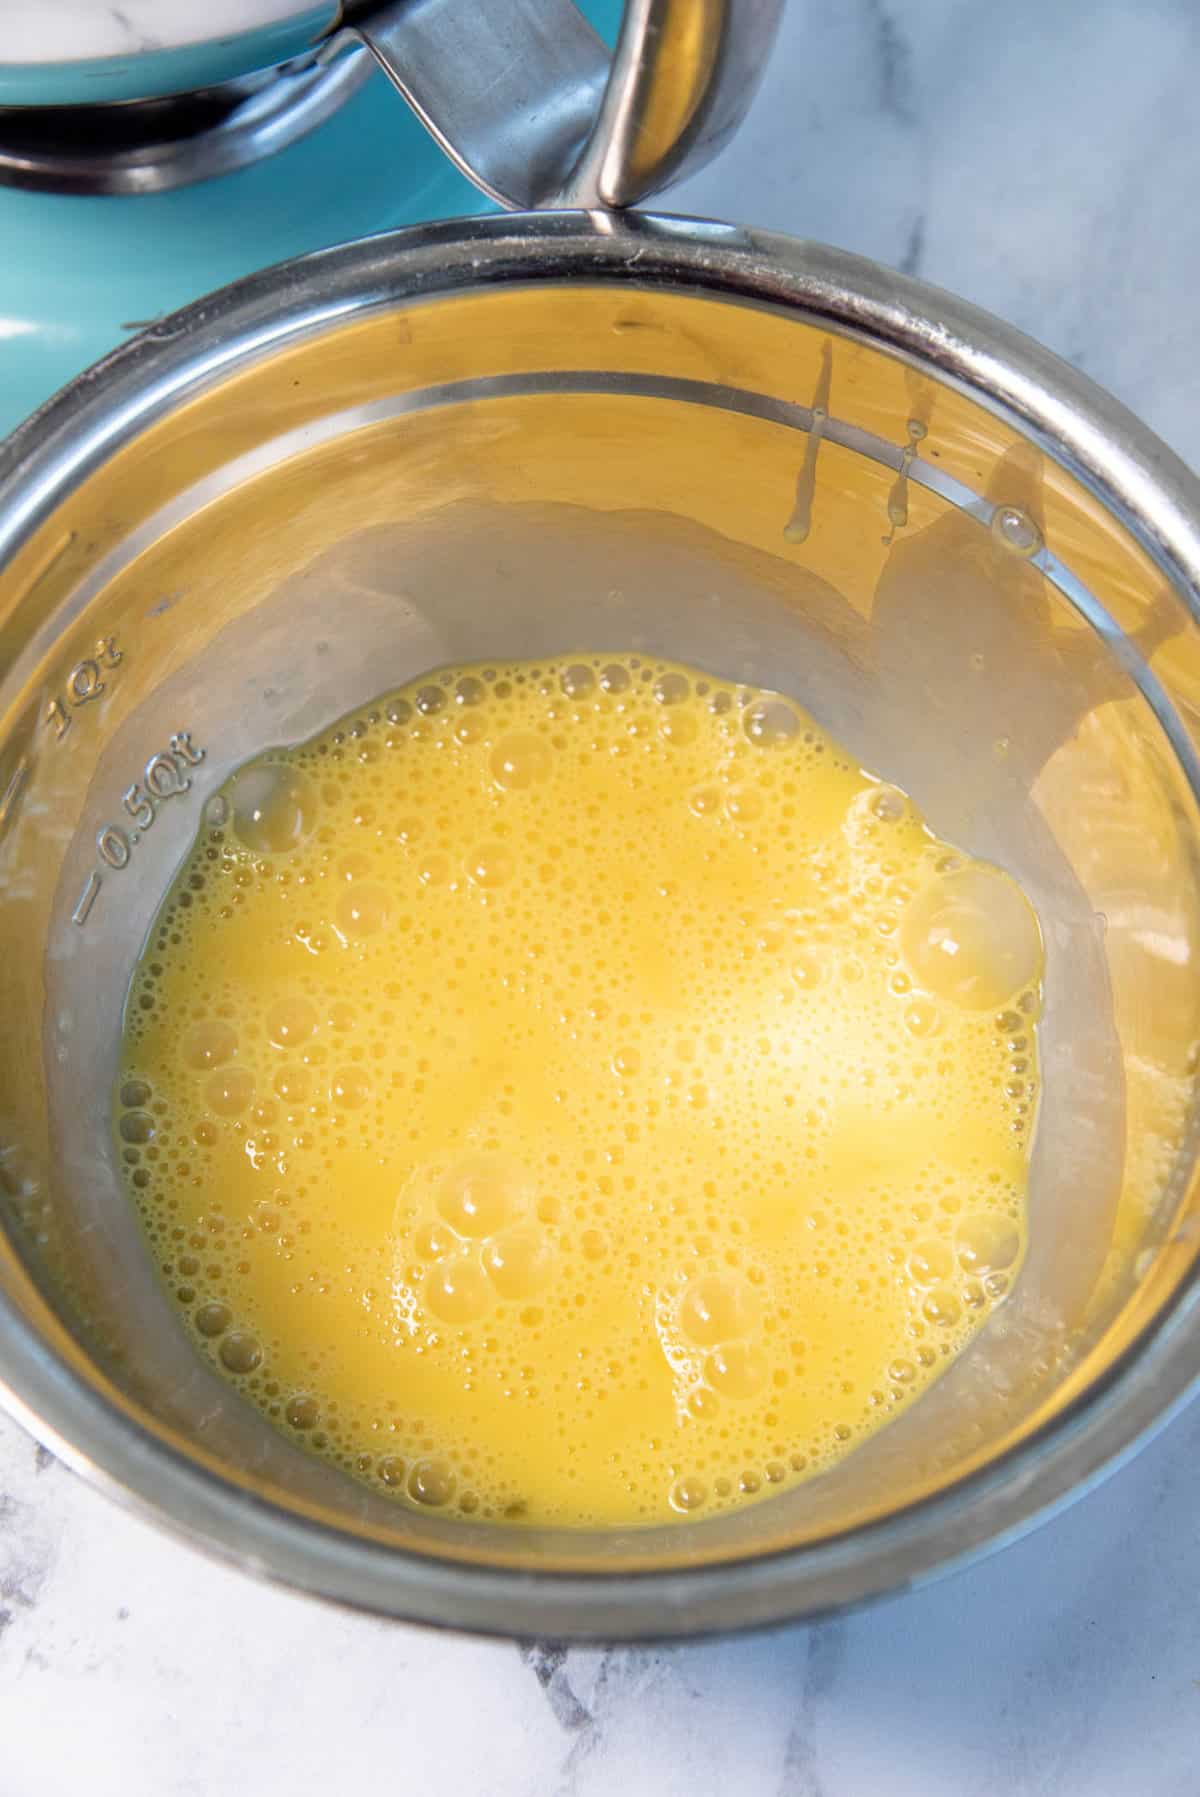 Eggs whisked in a metal bowl.